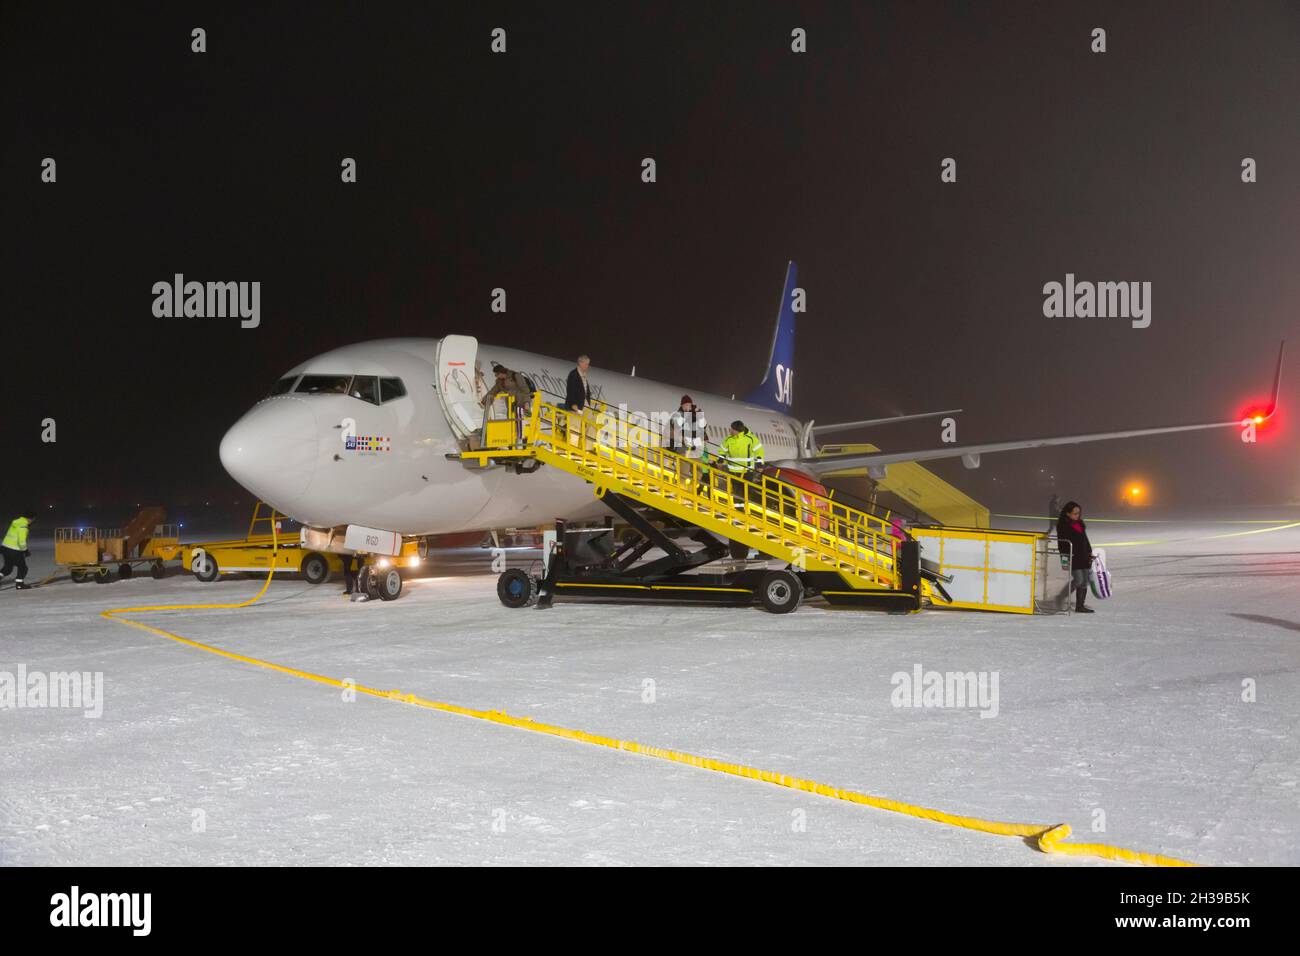 SAS, Airbus A 320 with passenger stairs in winter on snowy tarmac, Kiruna Swedavia Airport, Lapland, northern Sweden, Sweden Stock Photo